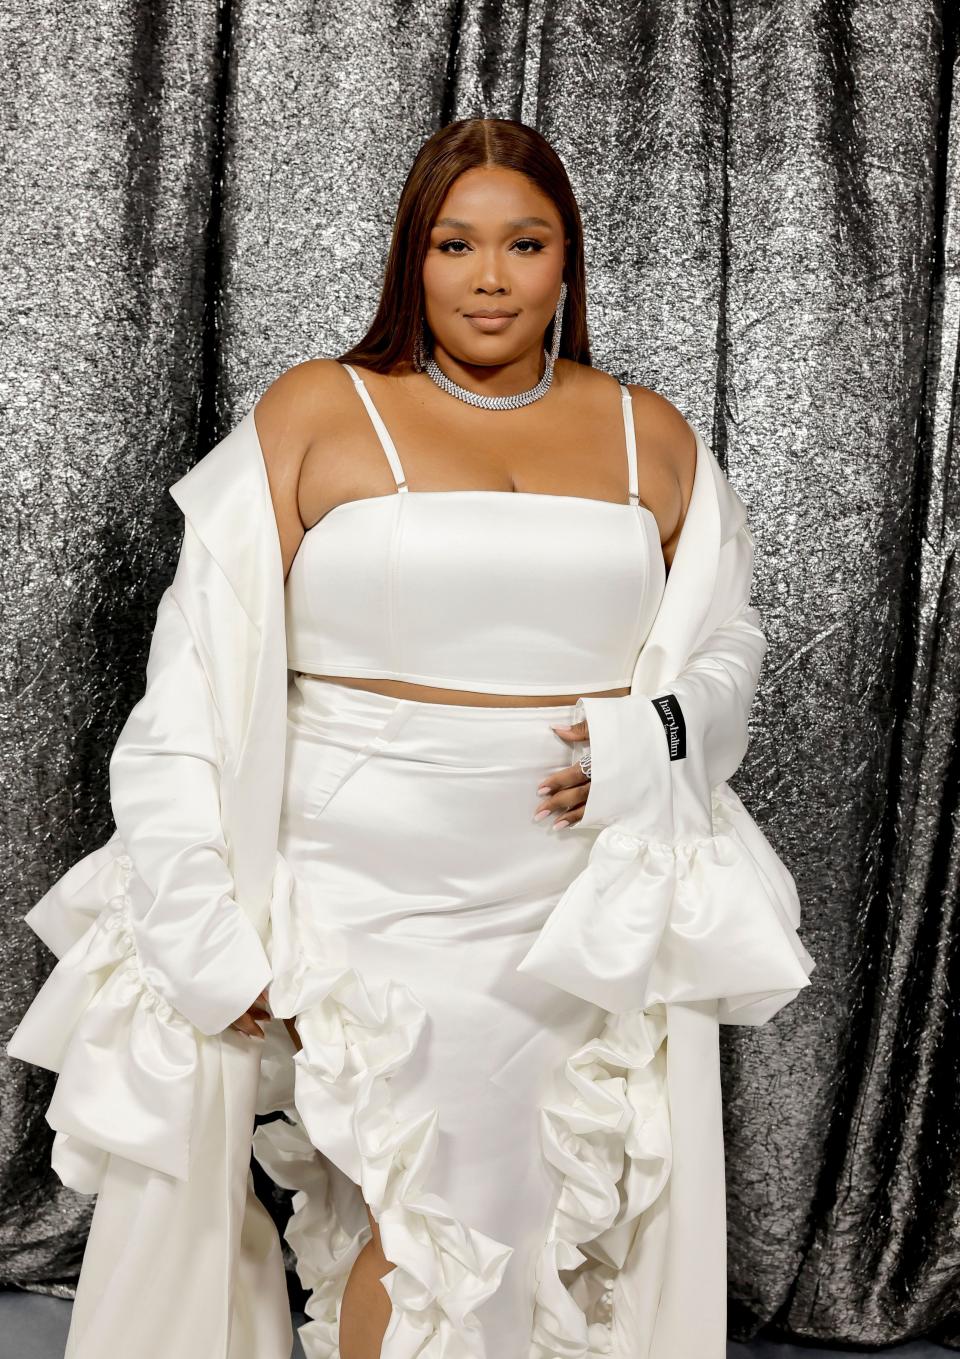 Lizzo attends the World Premiere of "Renaissance: A Film By Beyoncé" at Samuel Goldwyn Theater on November 25, 2023 in Beverly Hills, California.